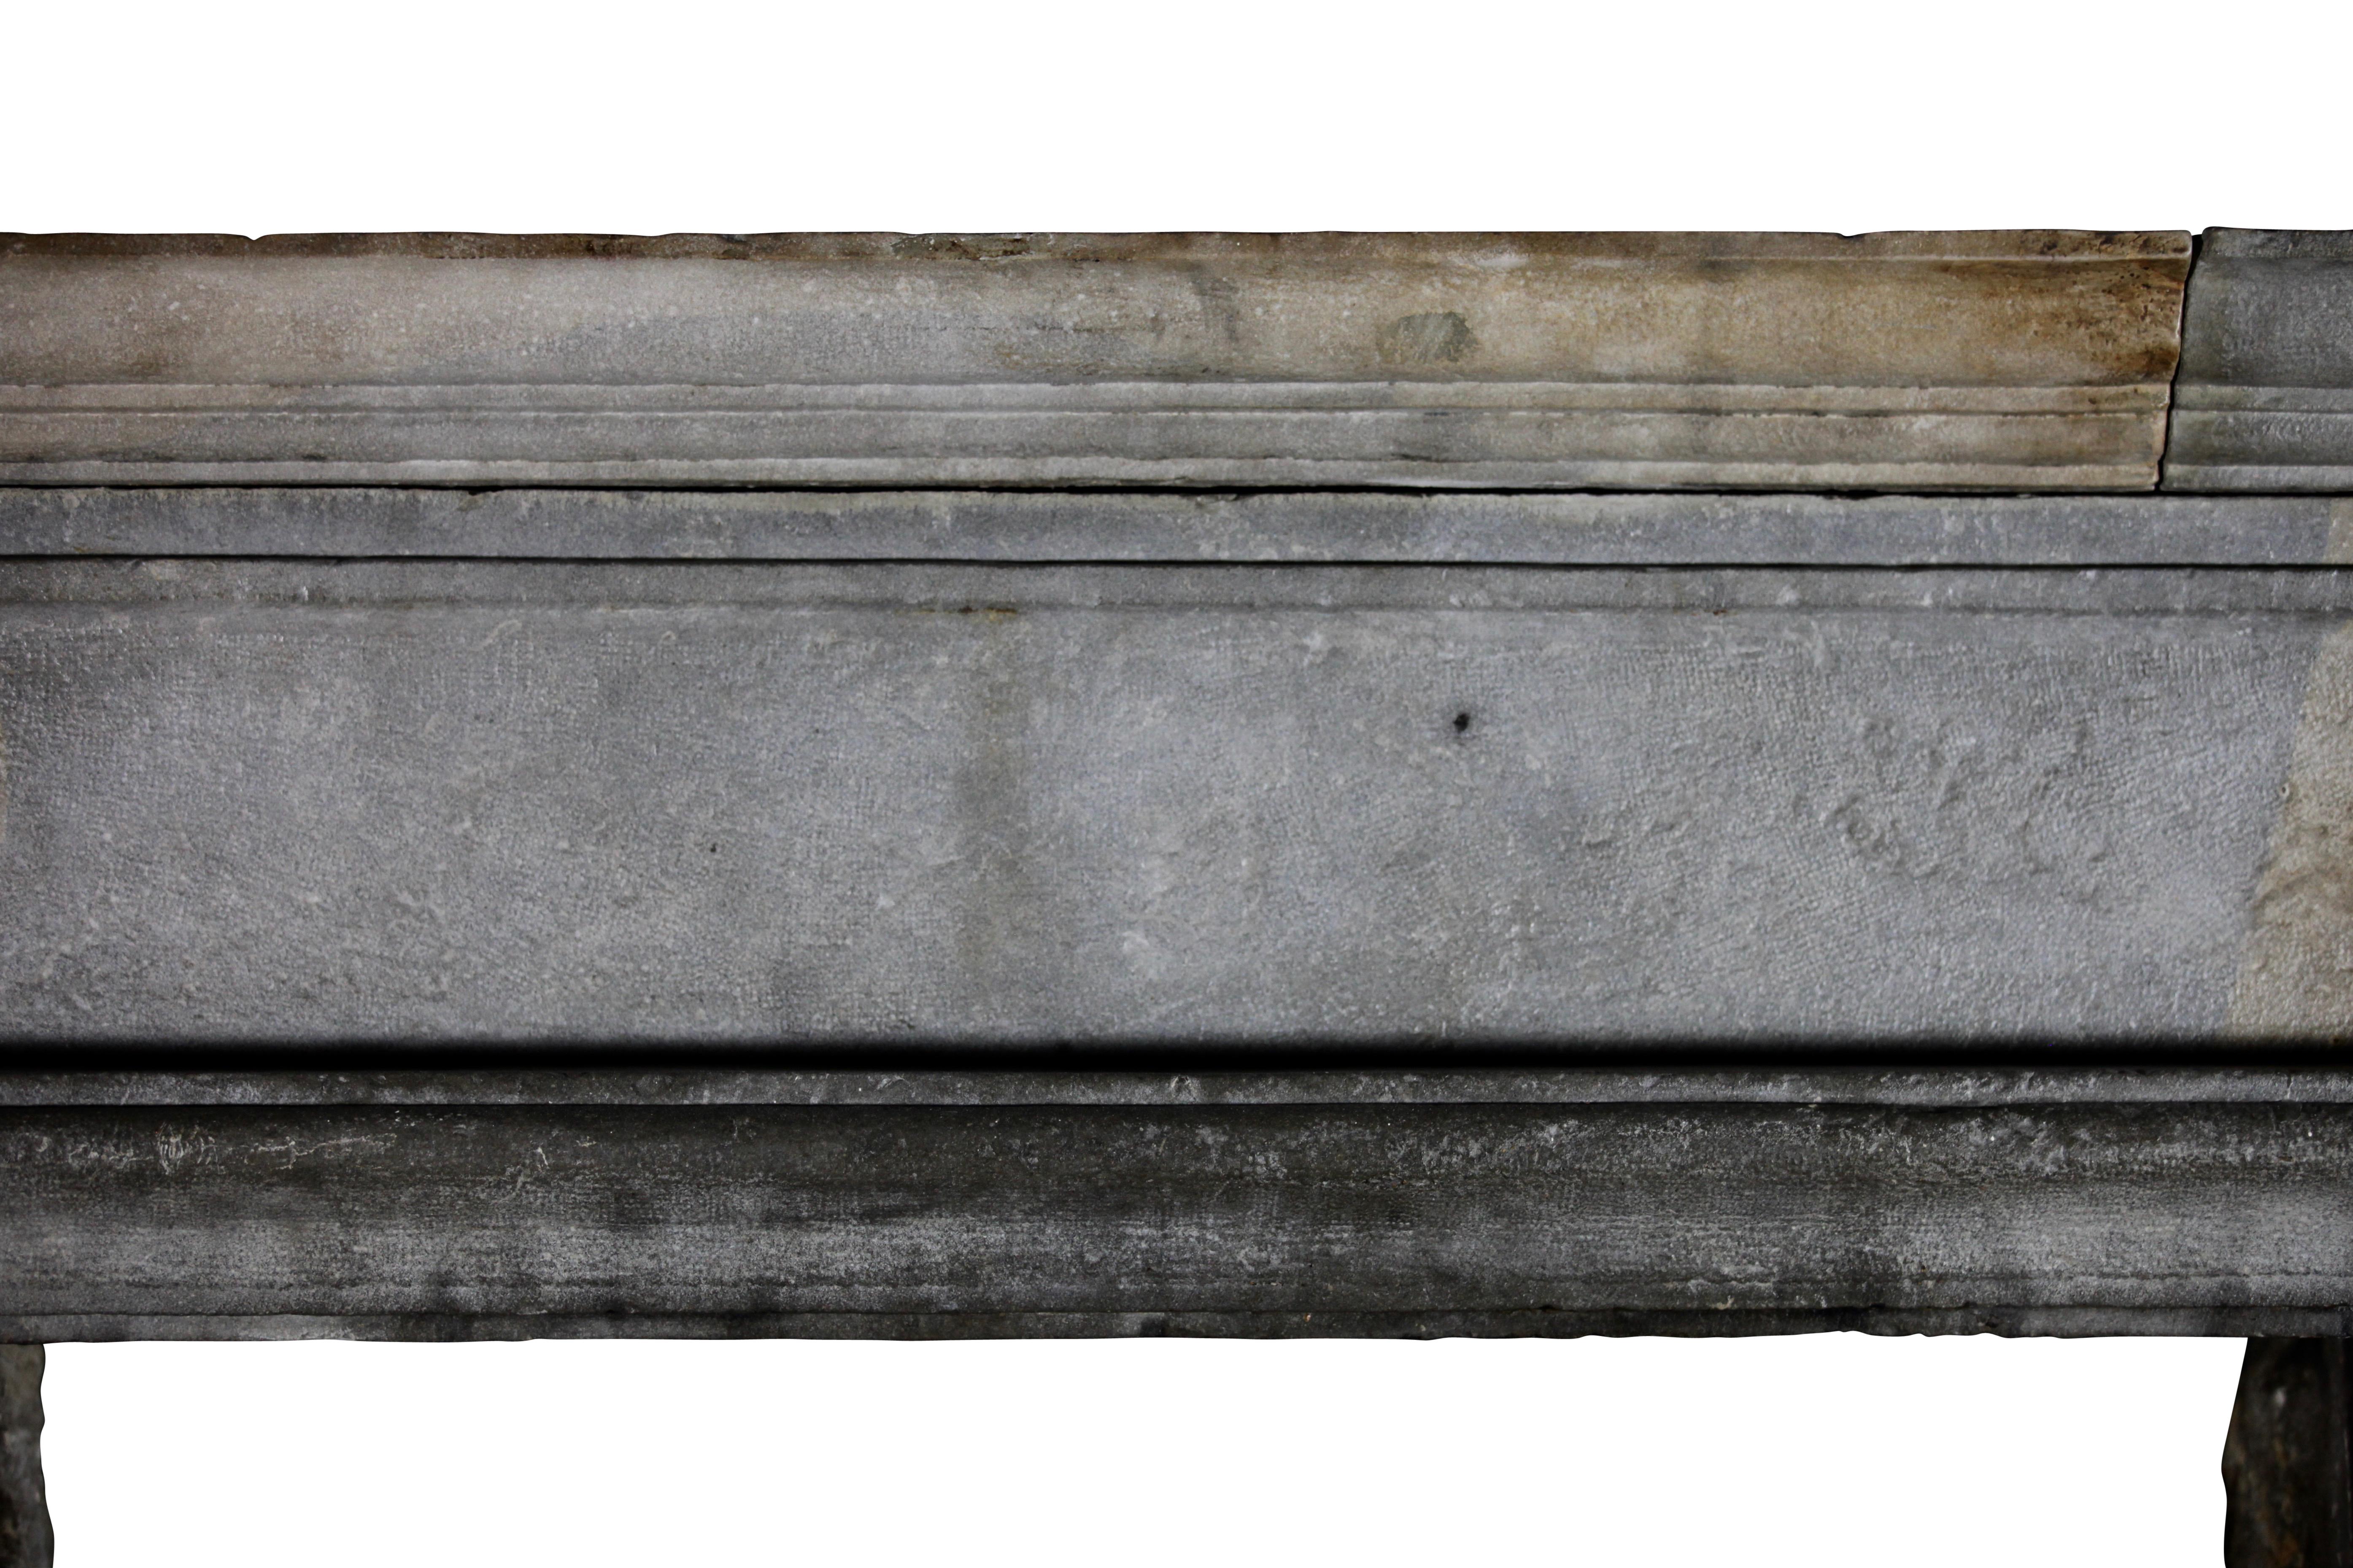 One word. Phenomenal. This original bicolor hard stone fireplace surround is a very early 17th century from the Louis XIII period.
The patina, size, color, condition and patina makes it a very special piece. It fits for European Country interior